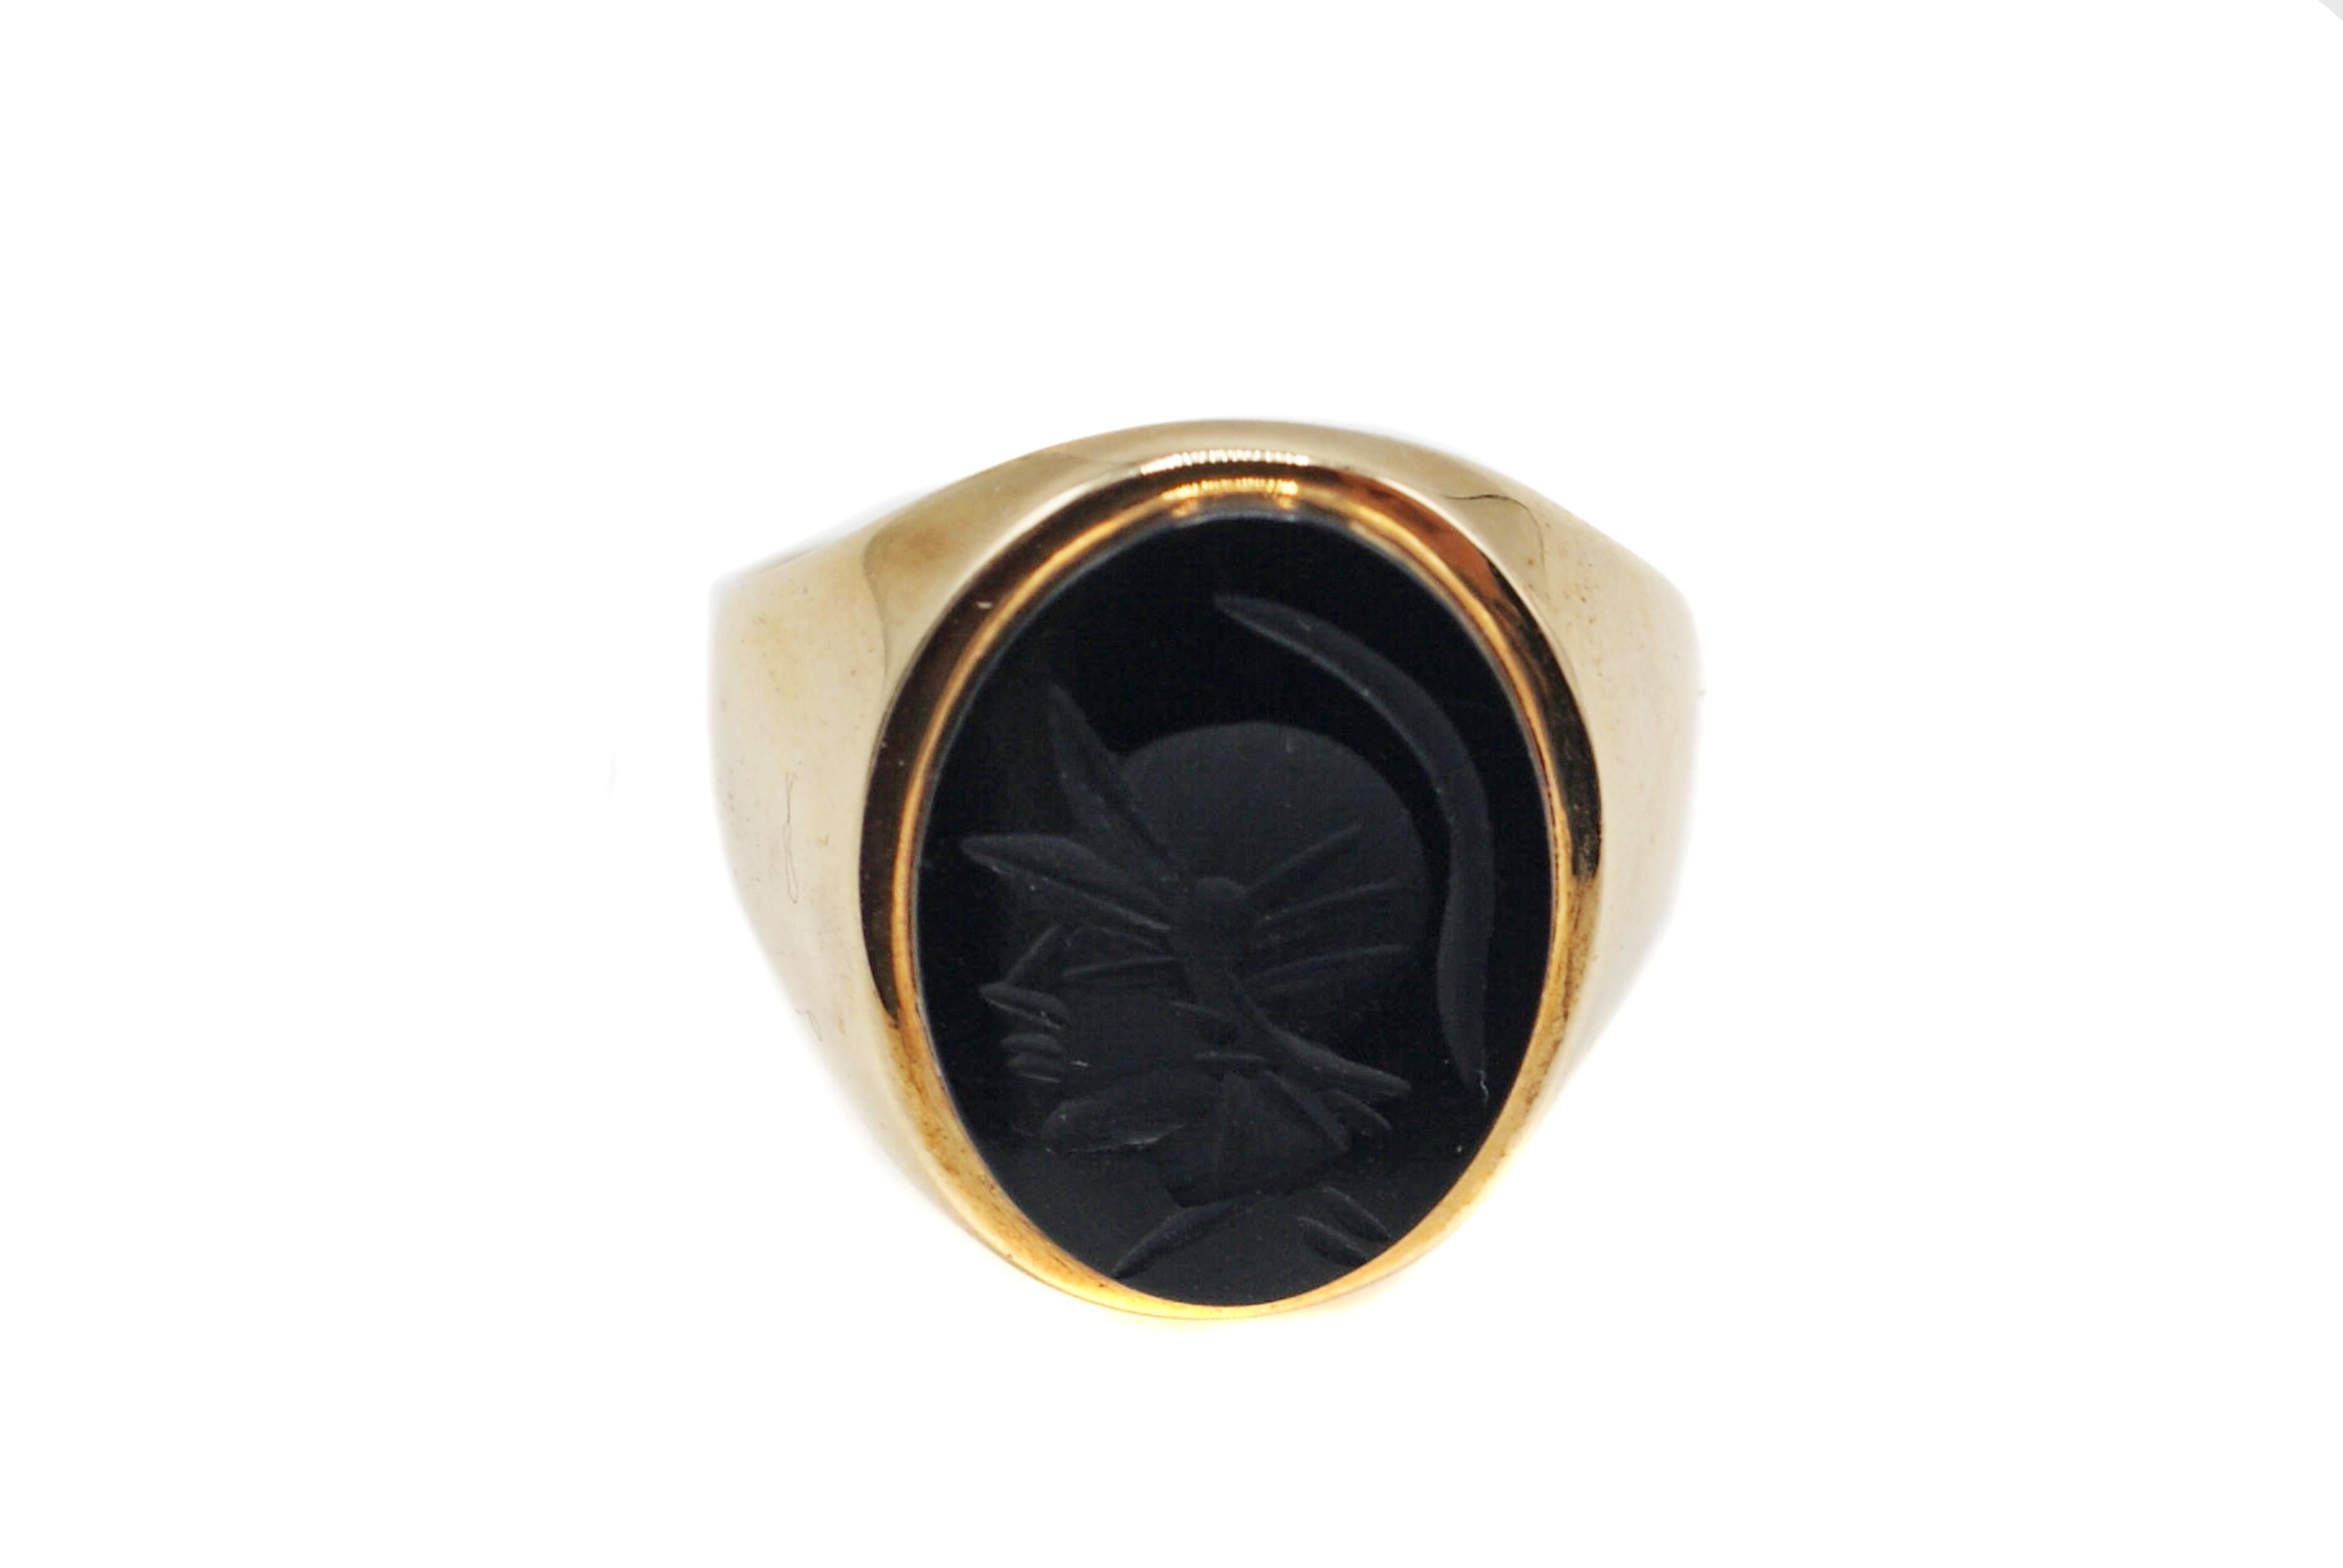 This unique ring features a profile of a Roman Soldier detailed in black onyx with a shiny finish. The beautifully carved face is indicative of another time, bringing an element of antiquity to the ring. Intaglio measures 16 mm x 12 mm. The inside